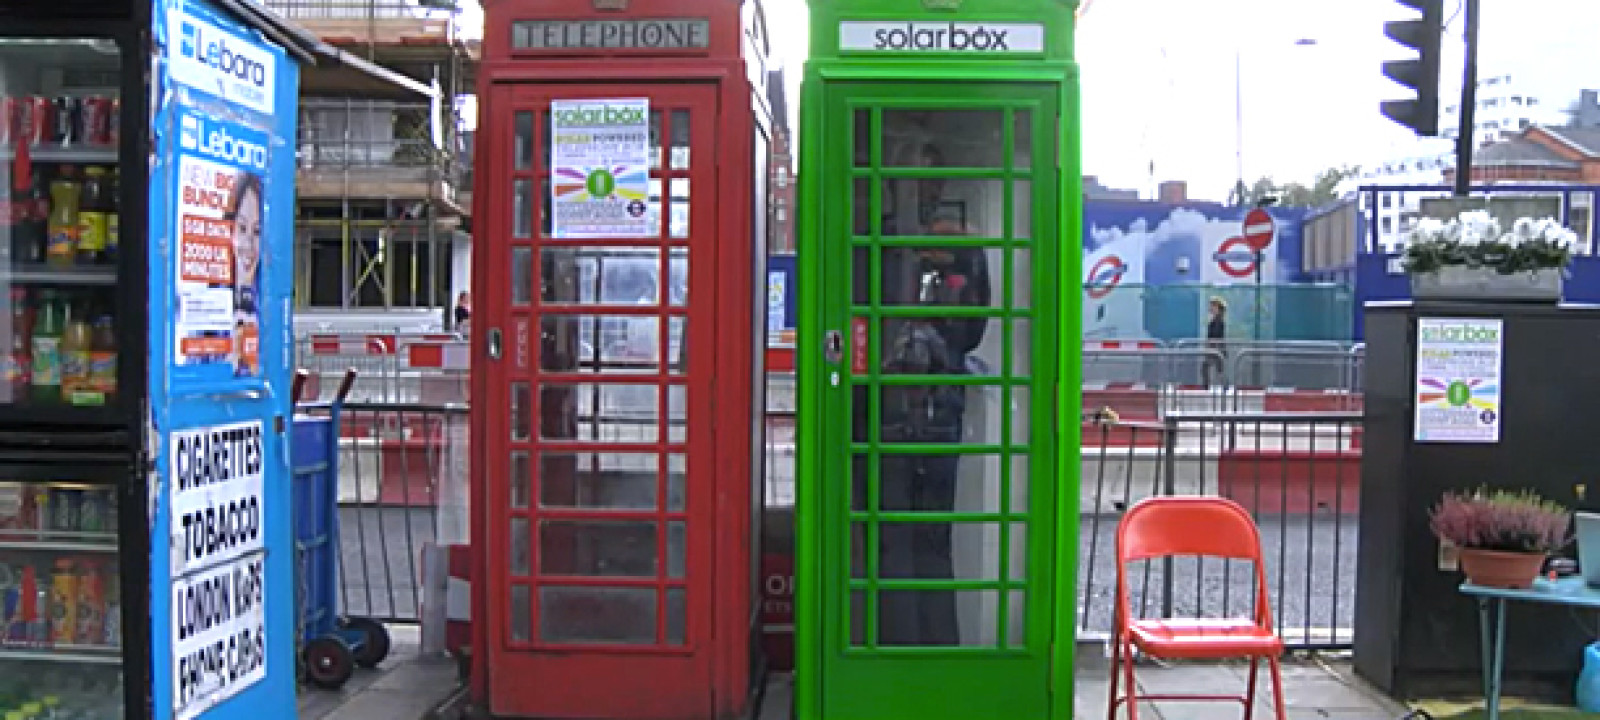 film about phonebox